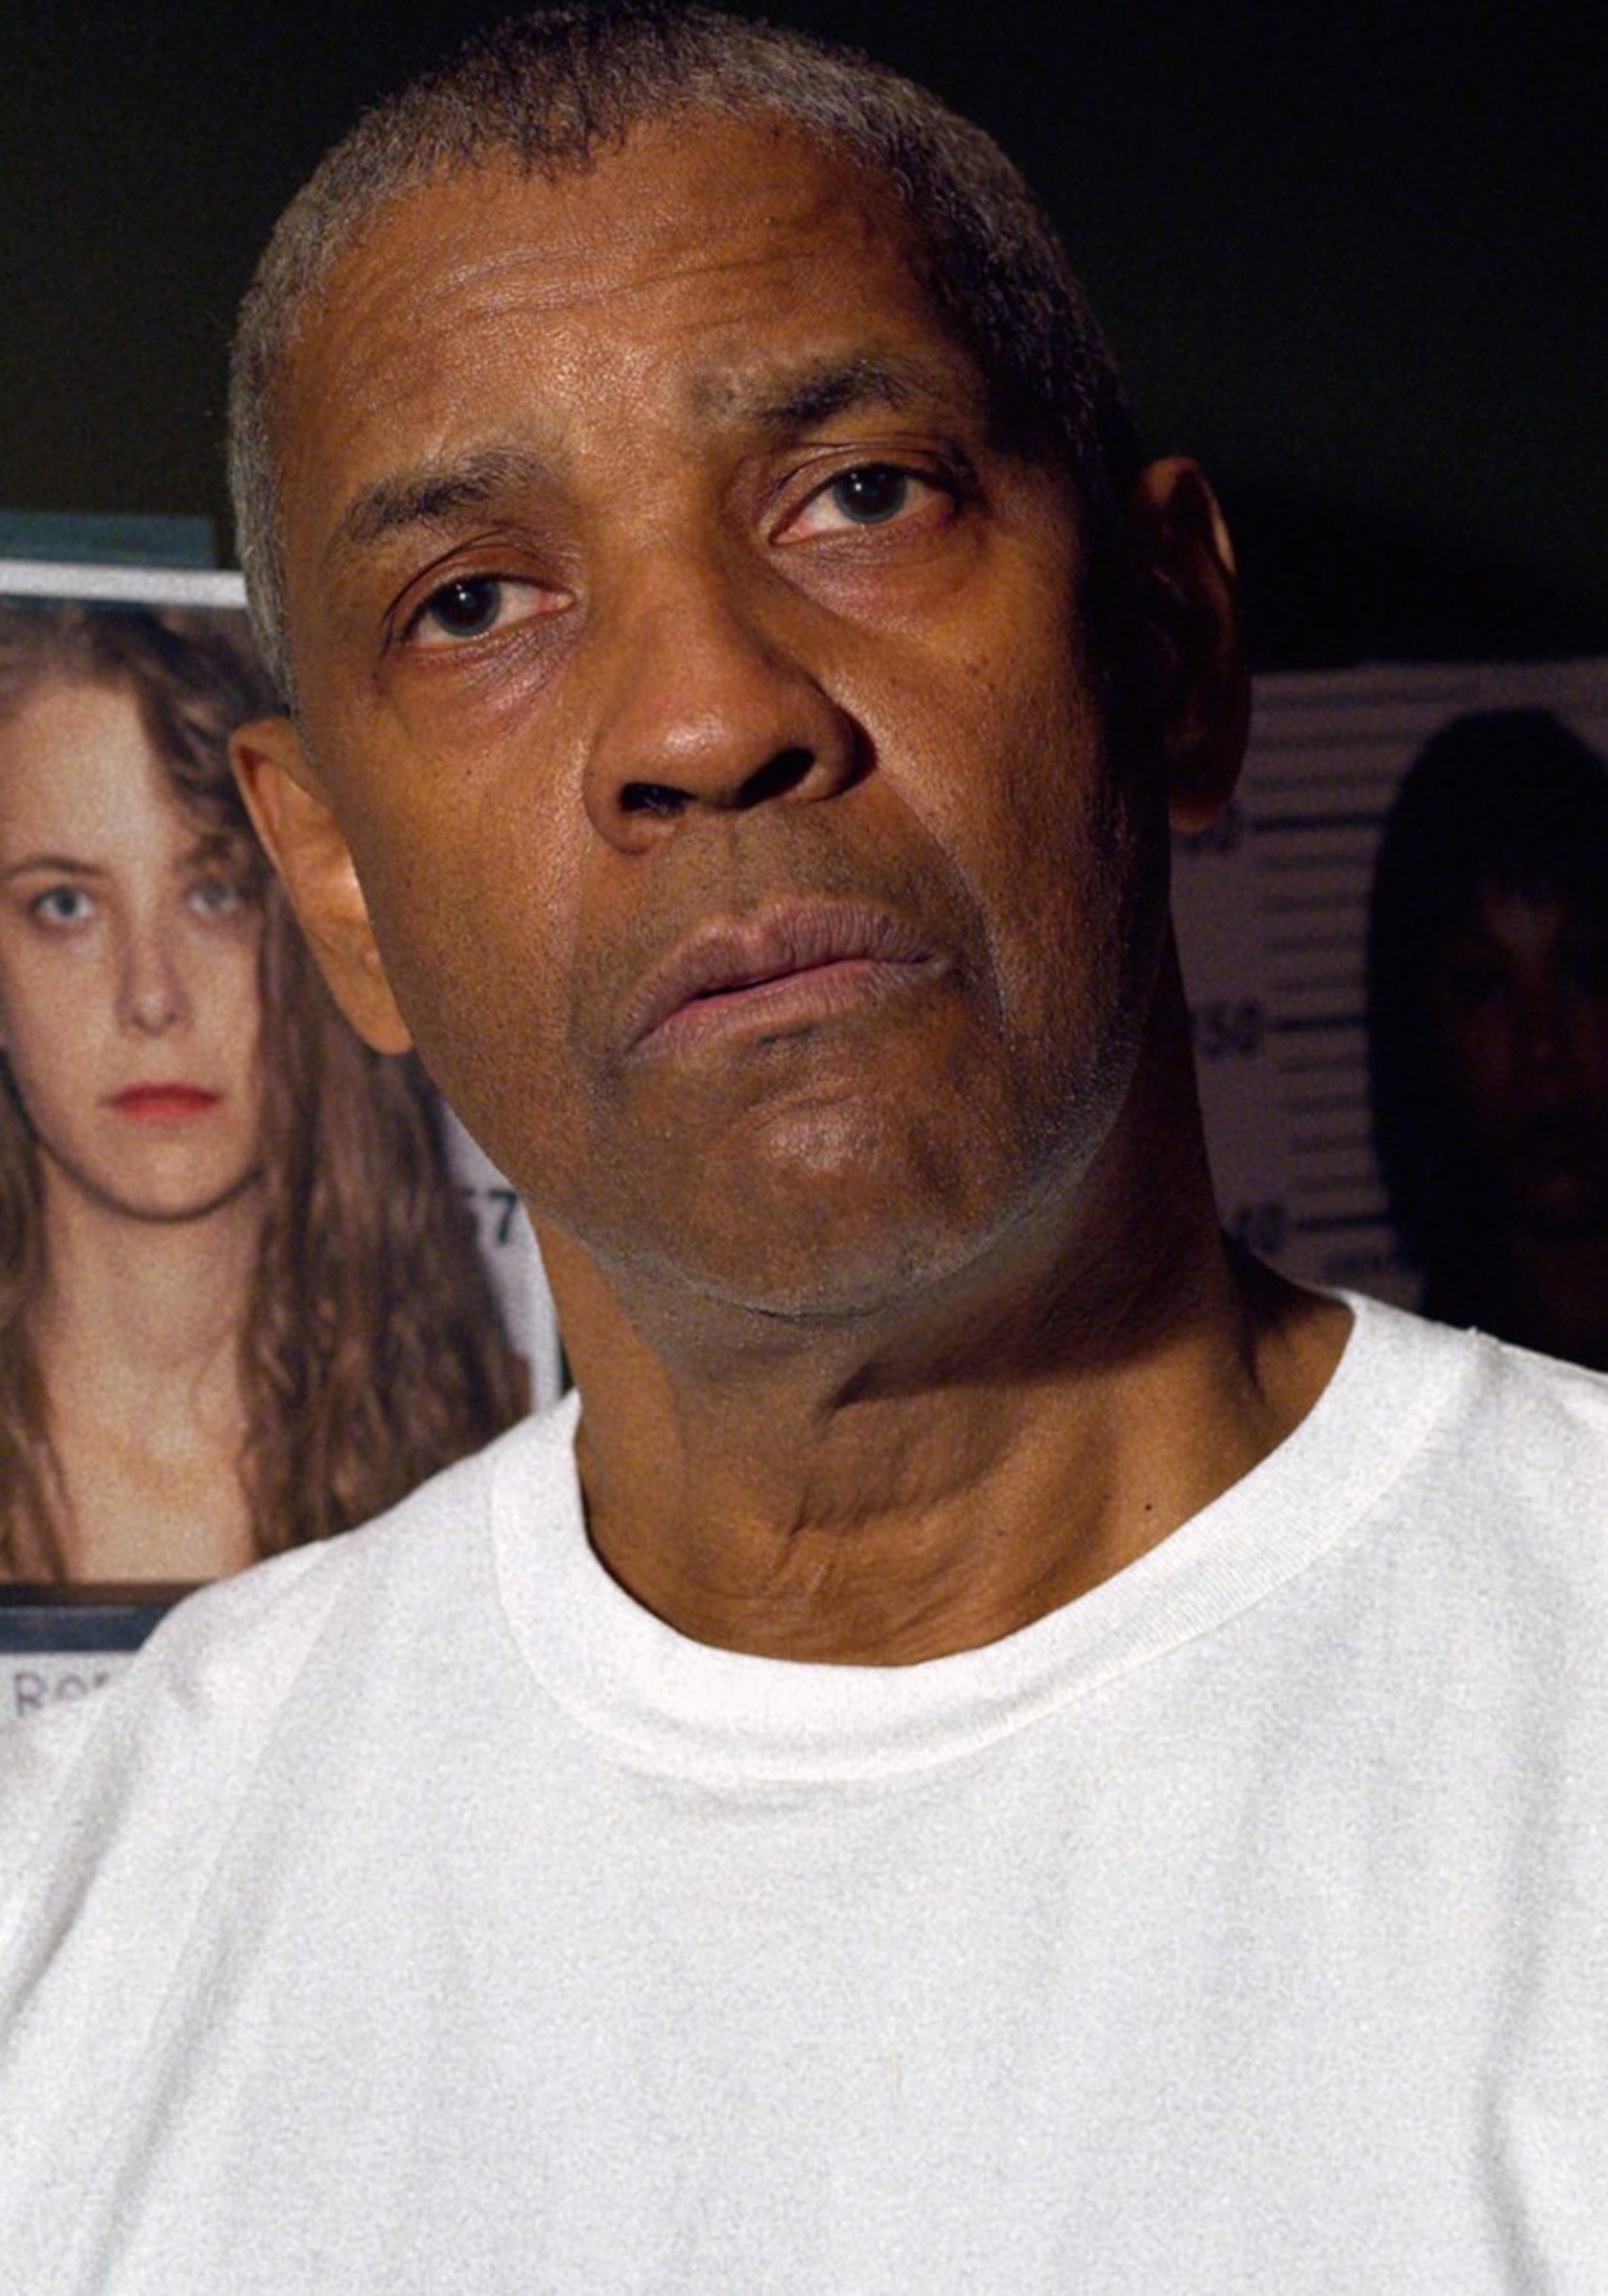 Denzel Washington wearing a white t-shirt while standing in front of images of potential suspects